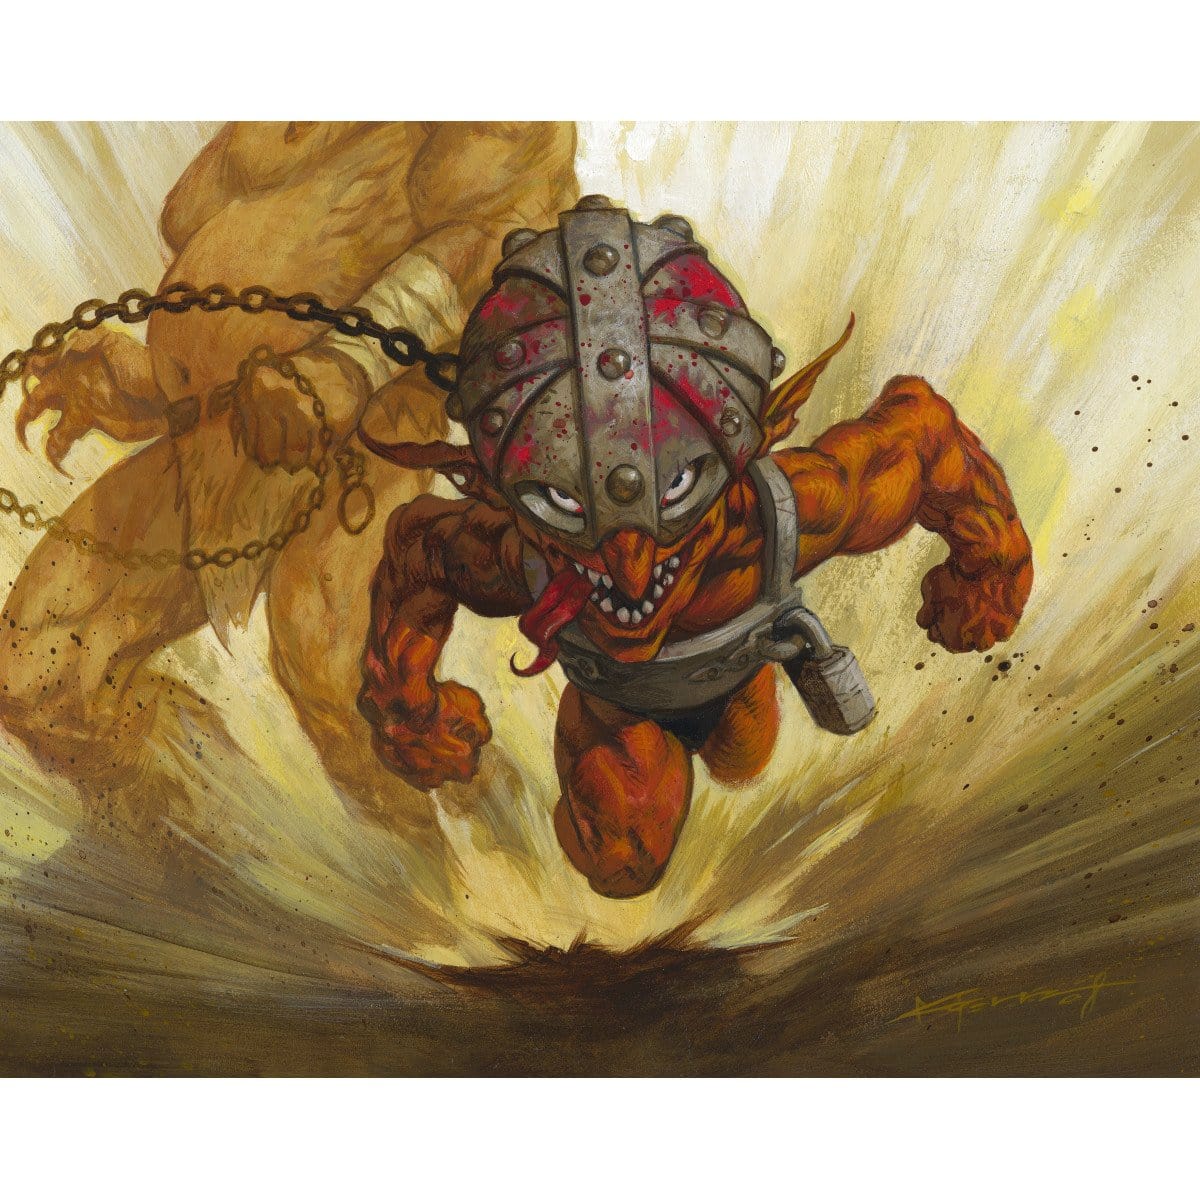 Goblin Lackey Print - Print - Original Magic Art - Accessories for Magic the Gathering and other card games